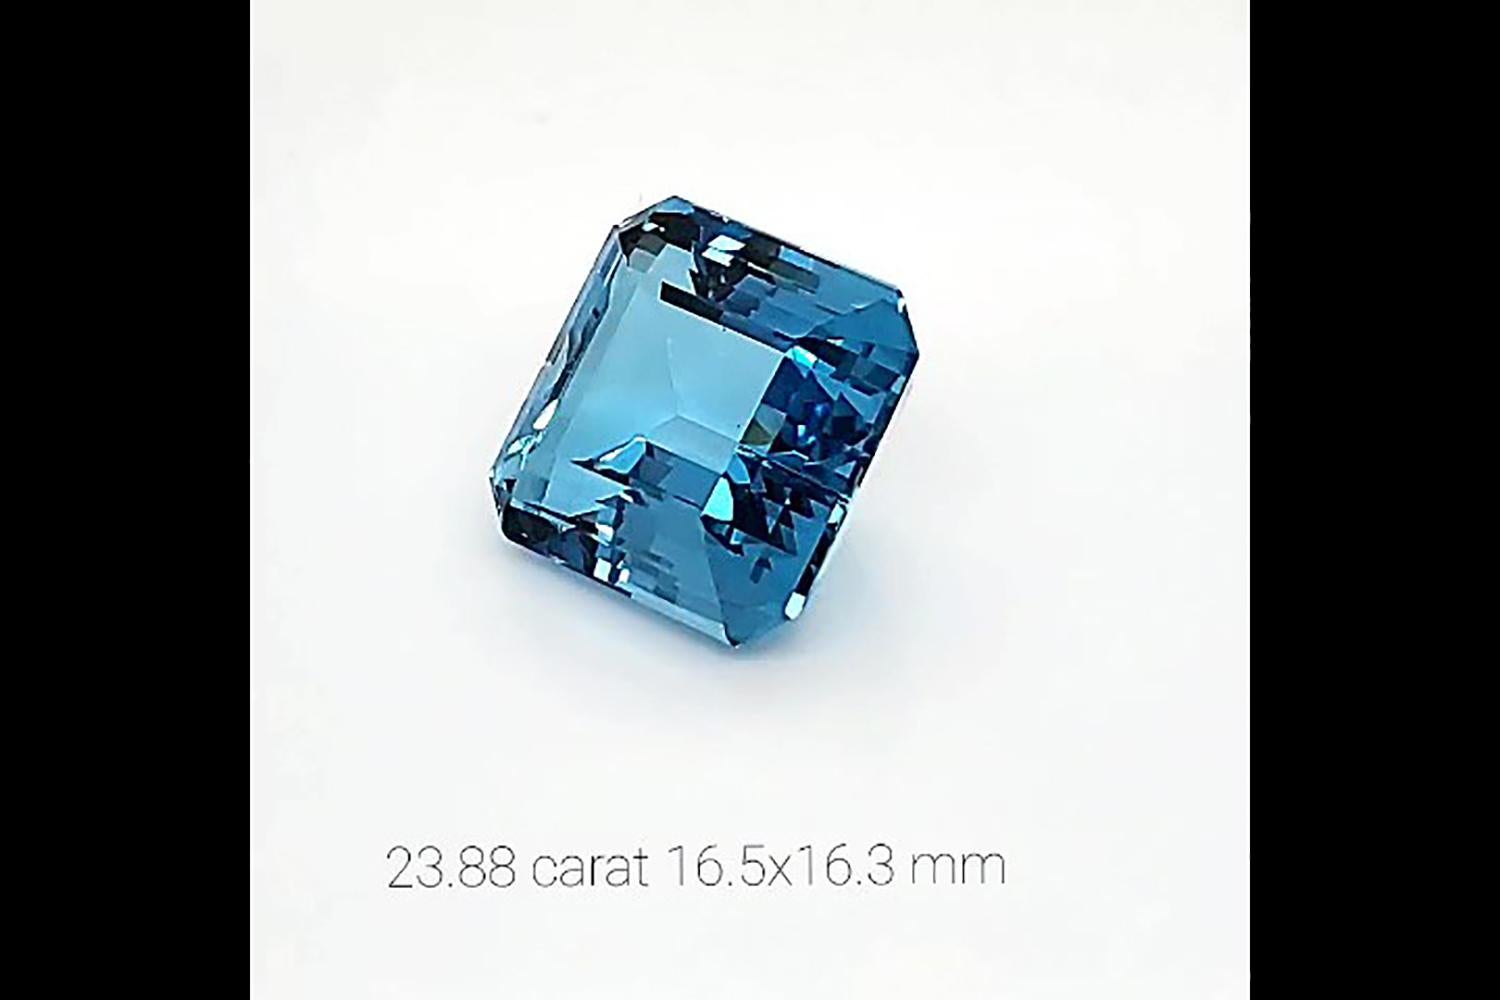 23.88 carat Natural Blue Square Emerald cut Aquamarine gemstone, of a high quality intense blue, transparent mineral with no inclusions, perfect choice for collectors or to commission a custom, unique piece of jewelry with it.
We are master jewelers